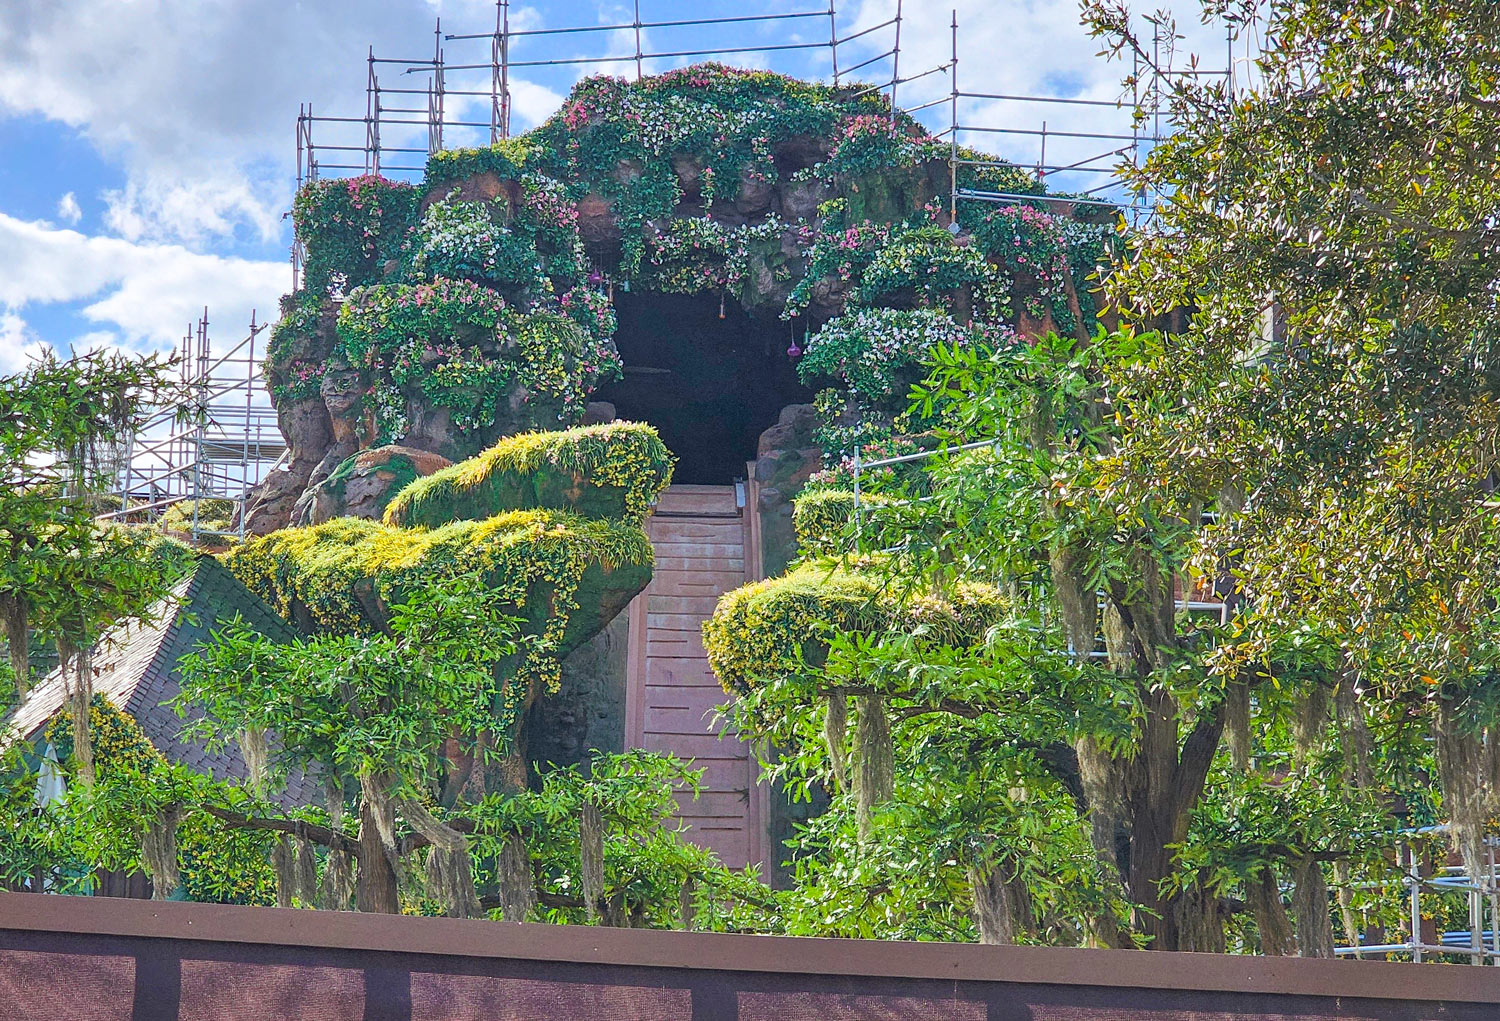 Tiana ride drop, the most thrilling aspect of this new 2024 Disney Parks attraction. 